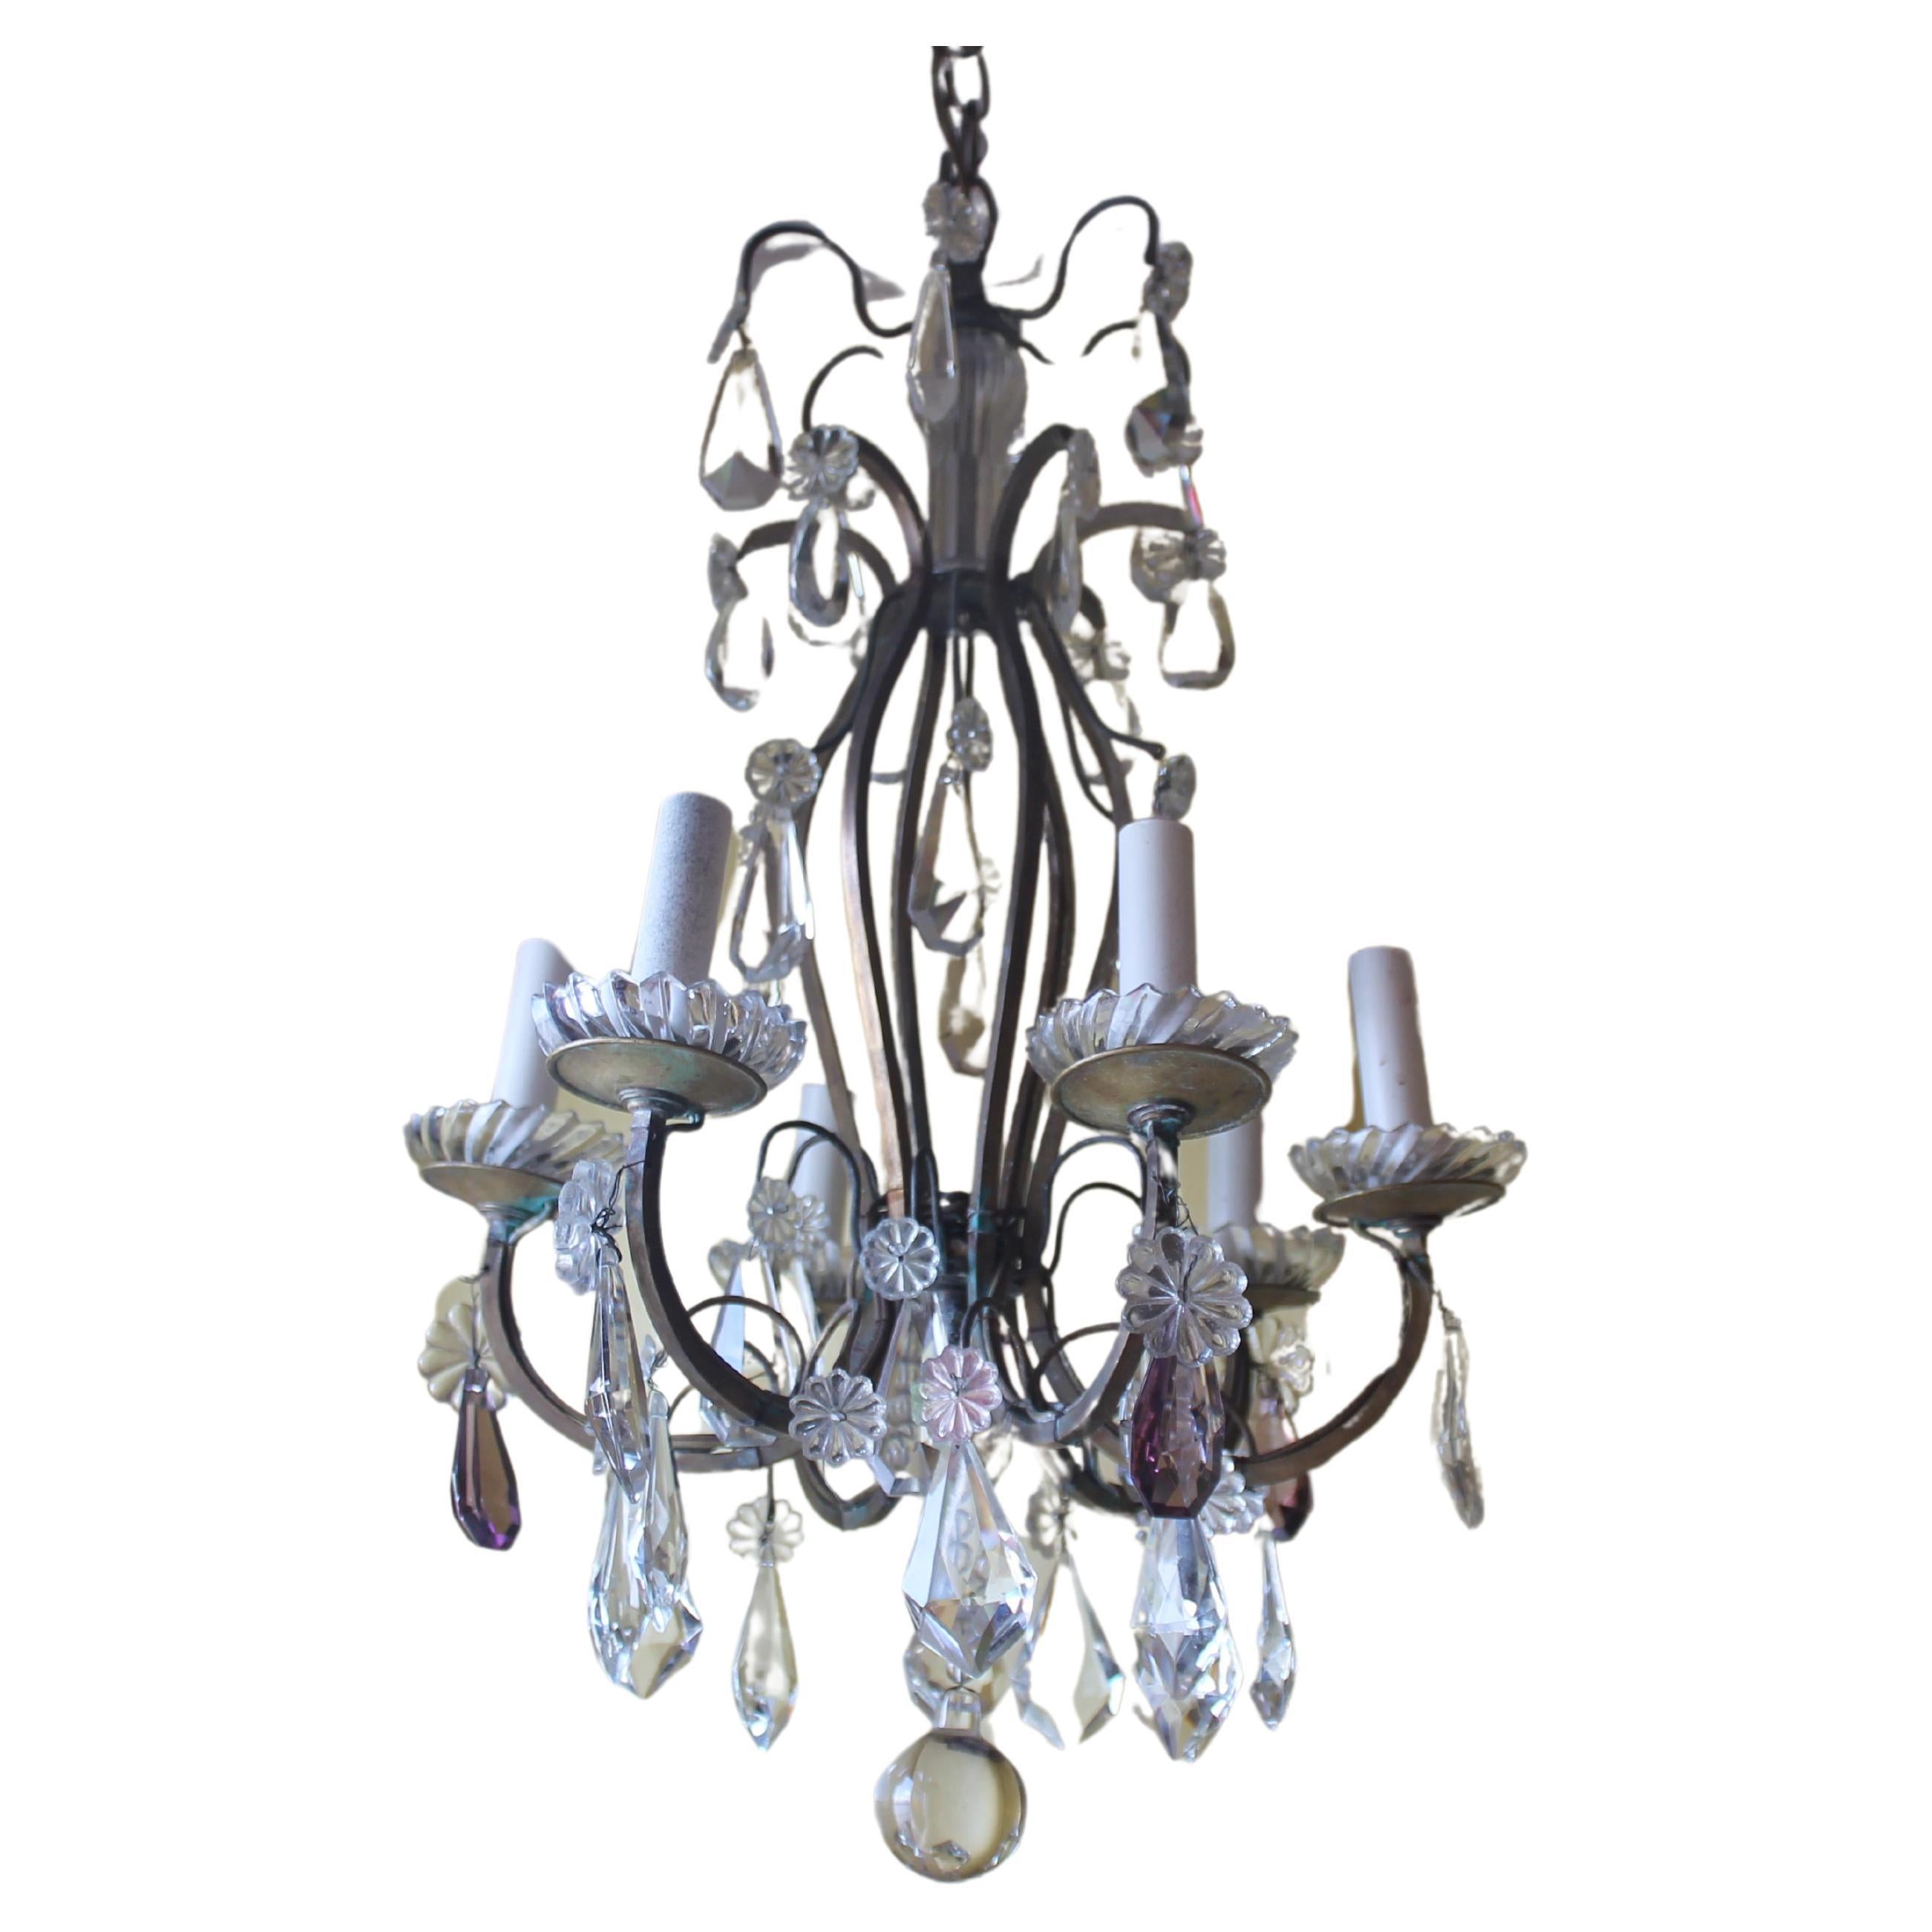 c1910 French Louis XV style Bronze w/ Crystal Chandelier atrributed to Baccarat